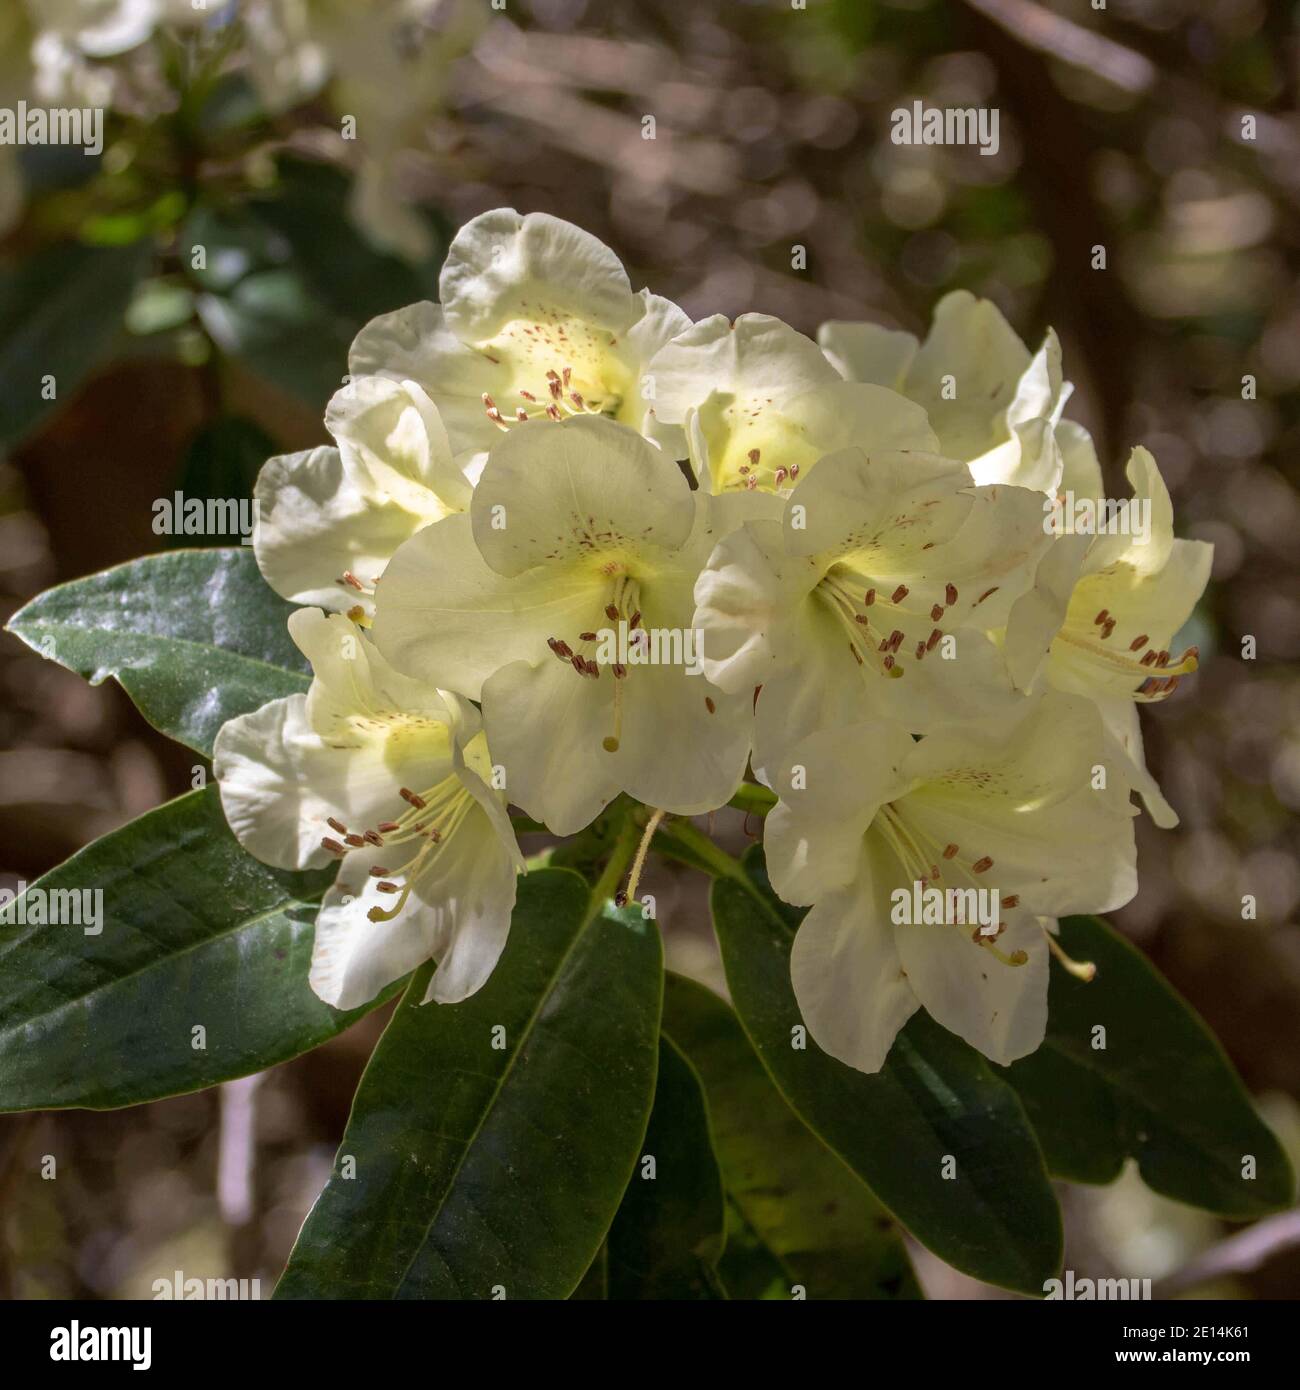 pretty pale yellow flowers of the rhododendron Stock Photo